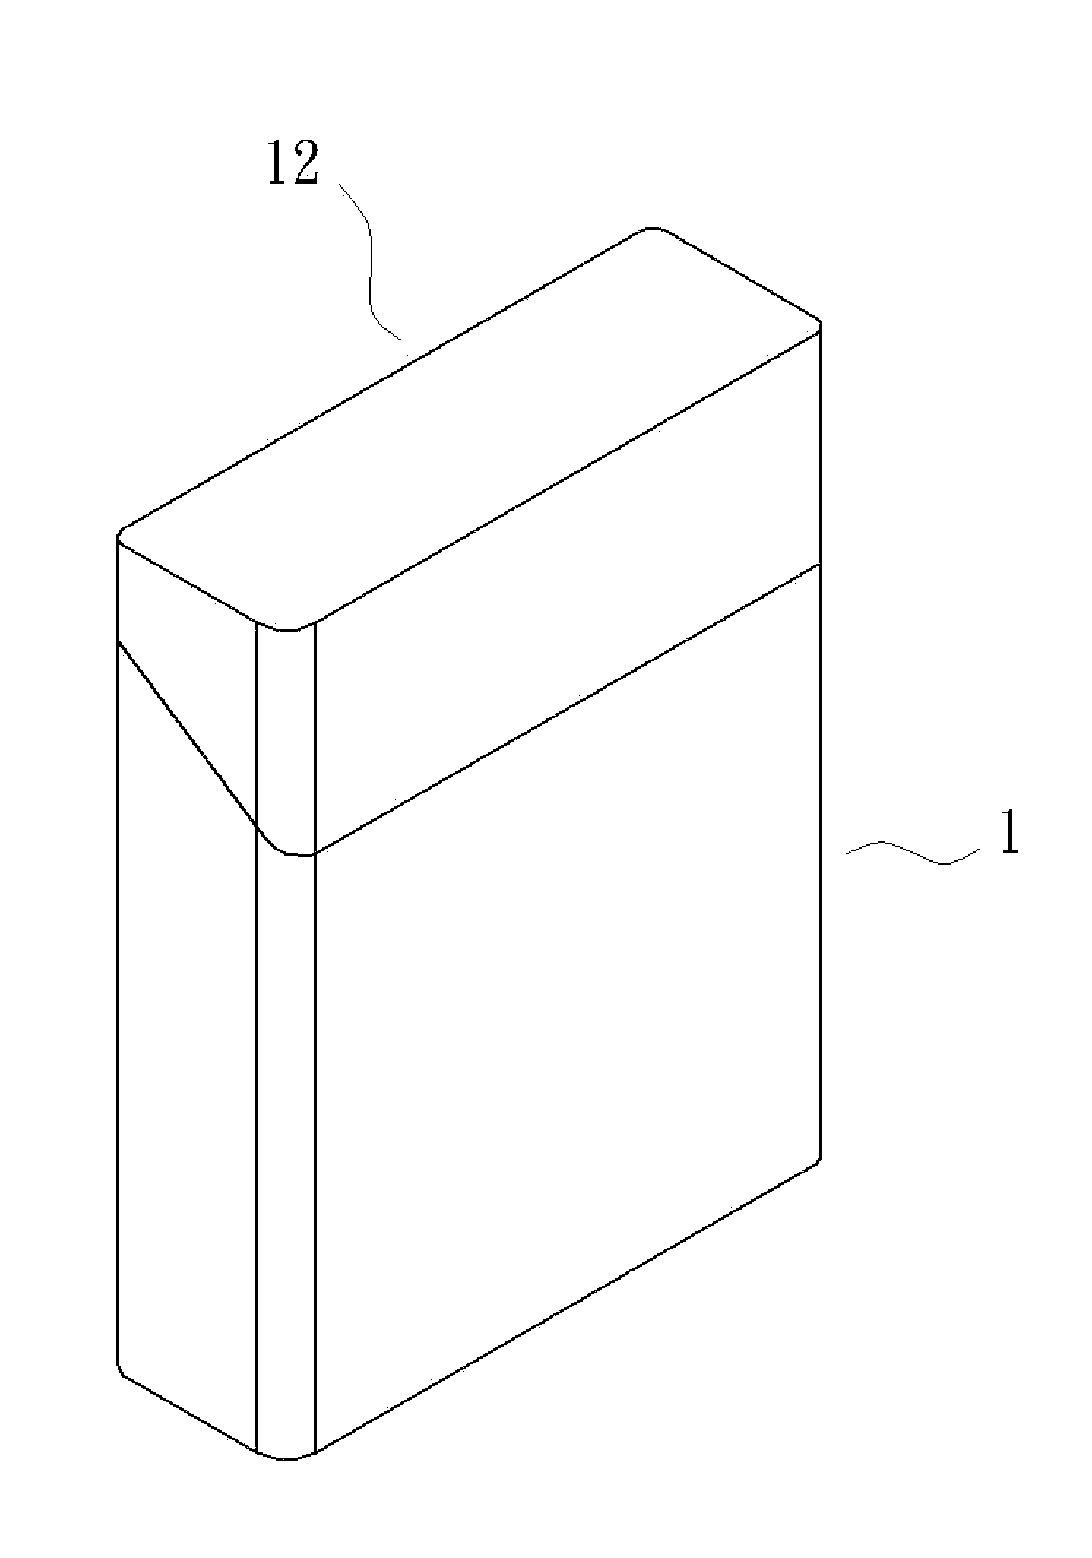 Cigarette box structure capable of collecting cigarette ashes and cigarette buds